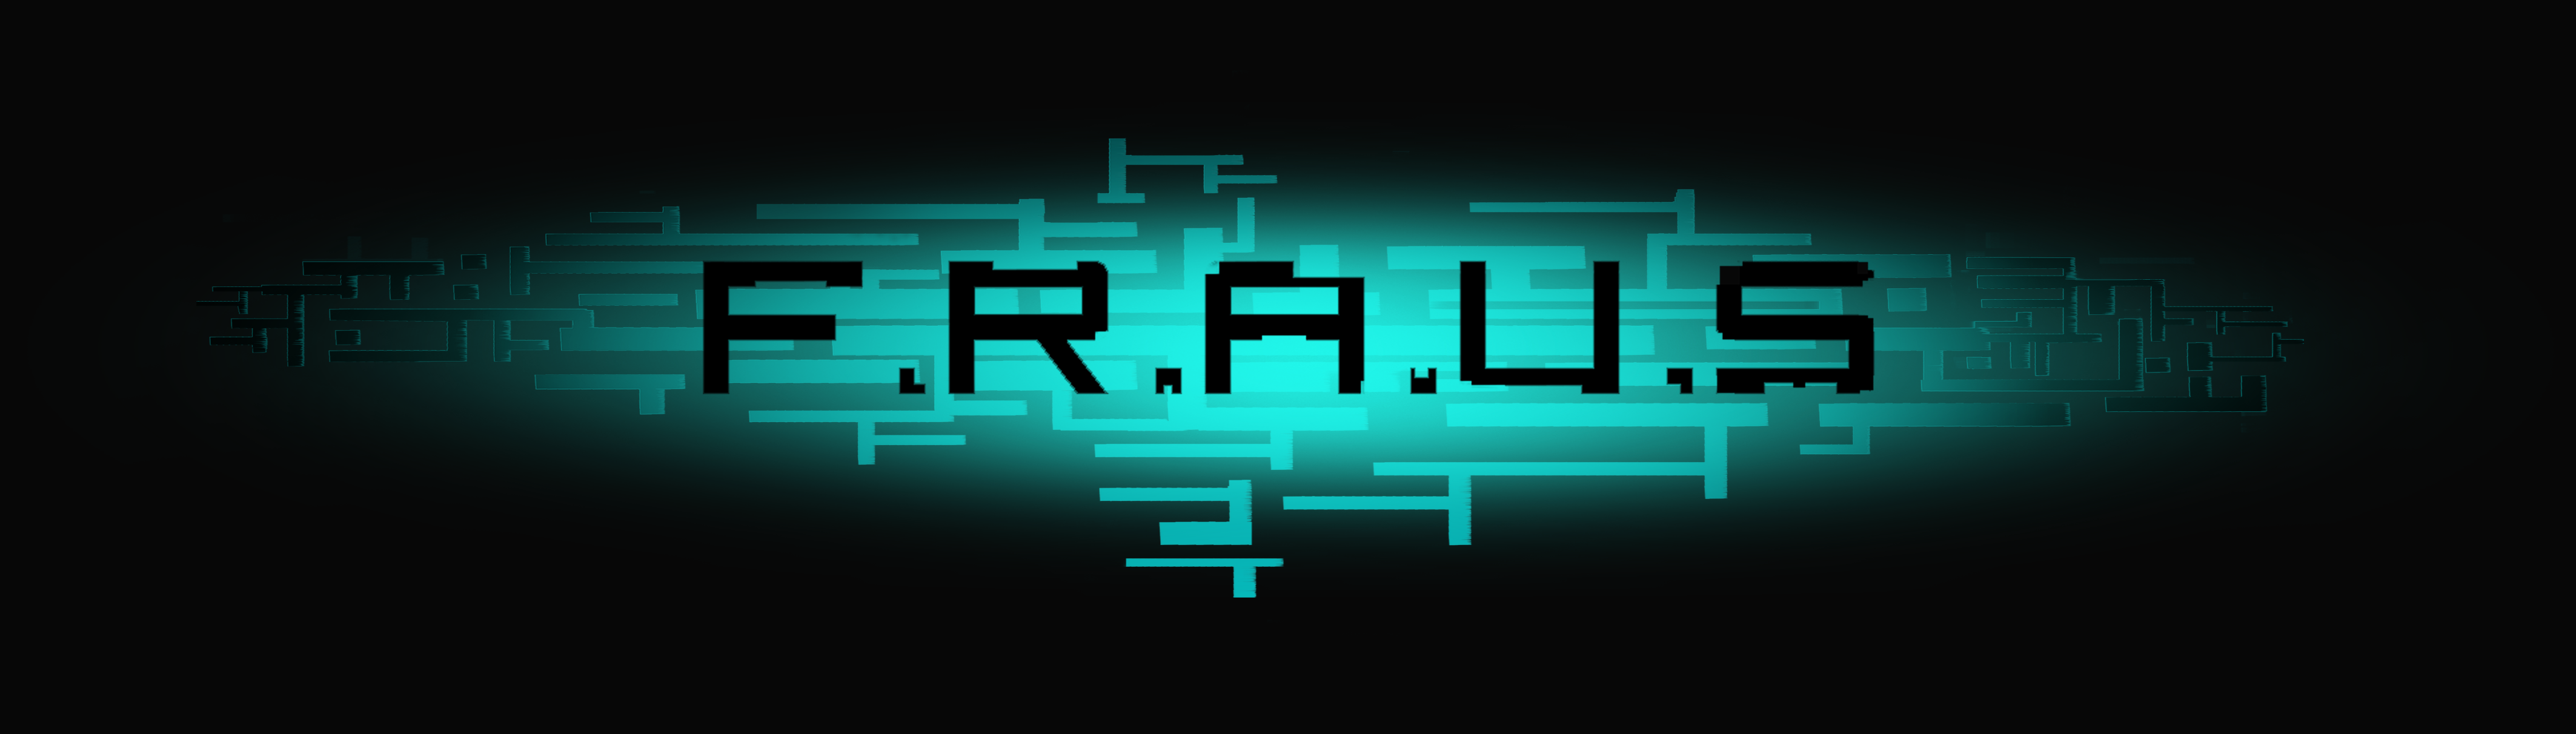 FRAUS BANNER 3.png